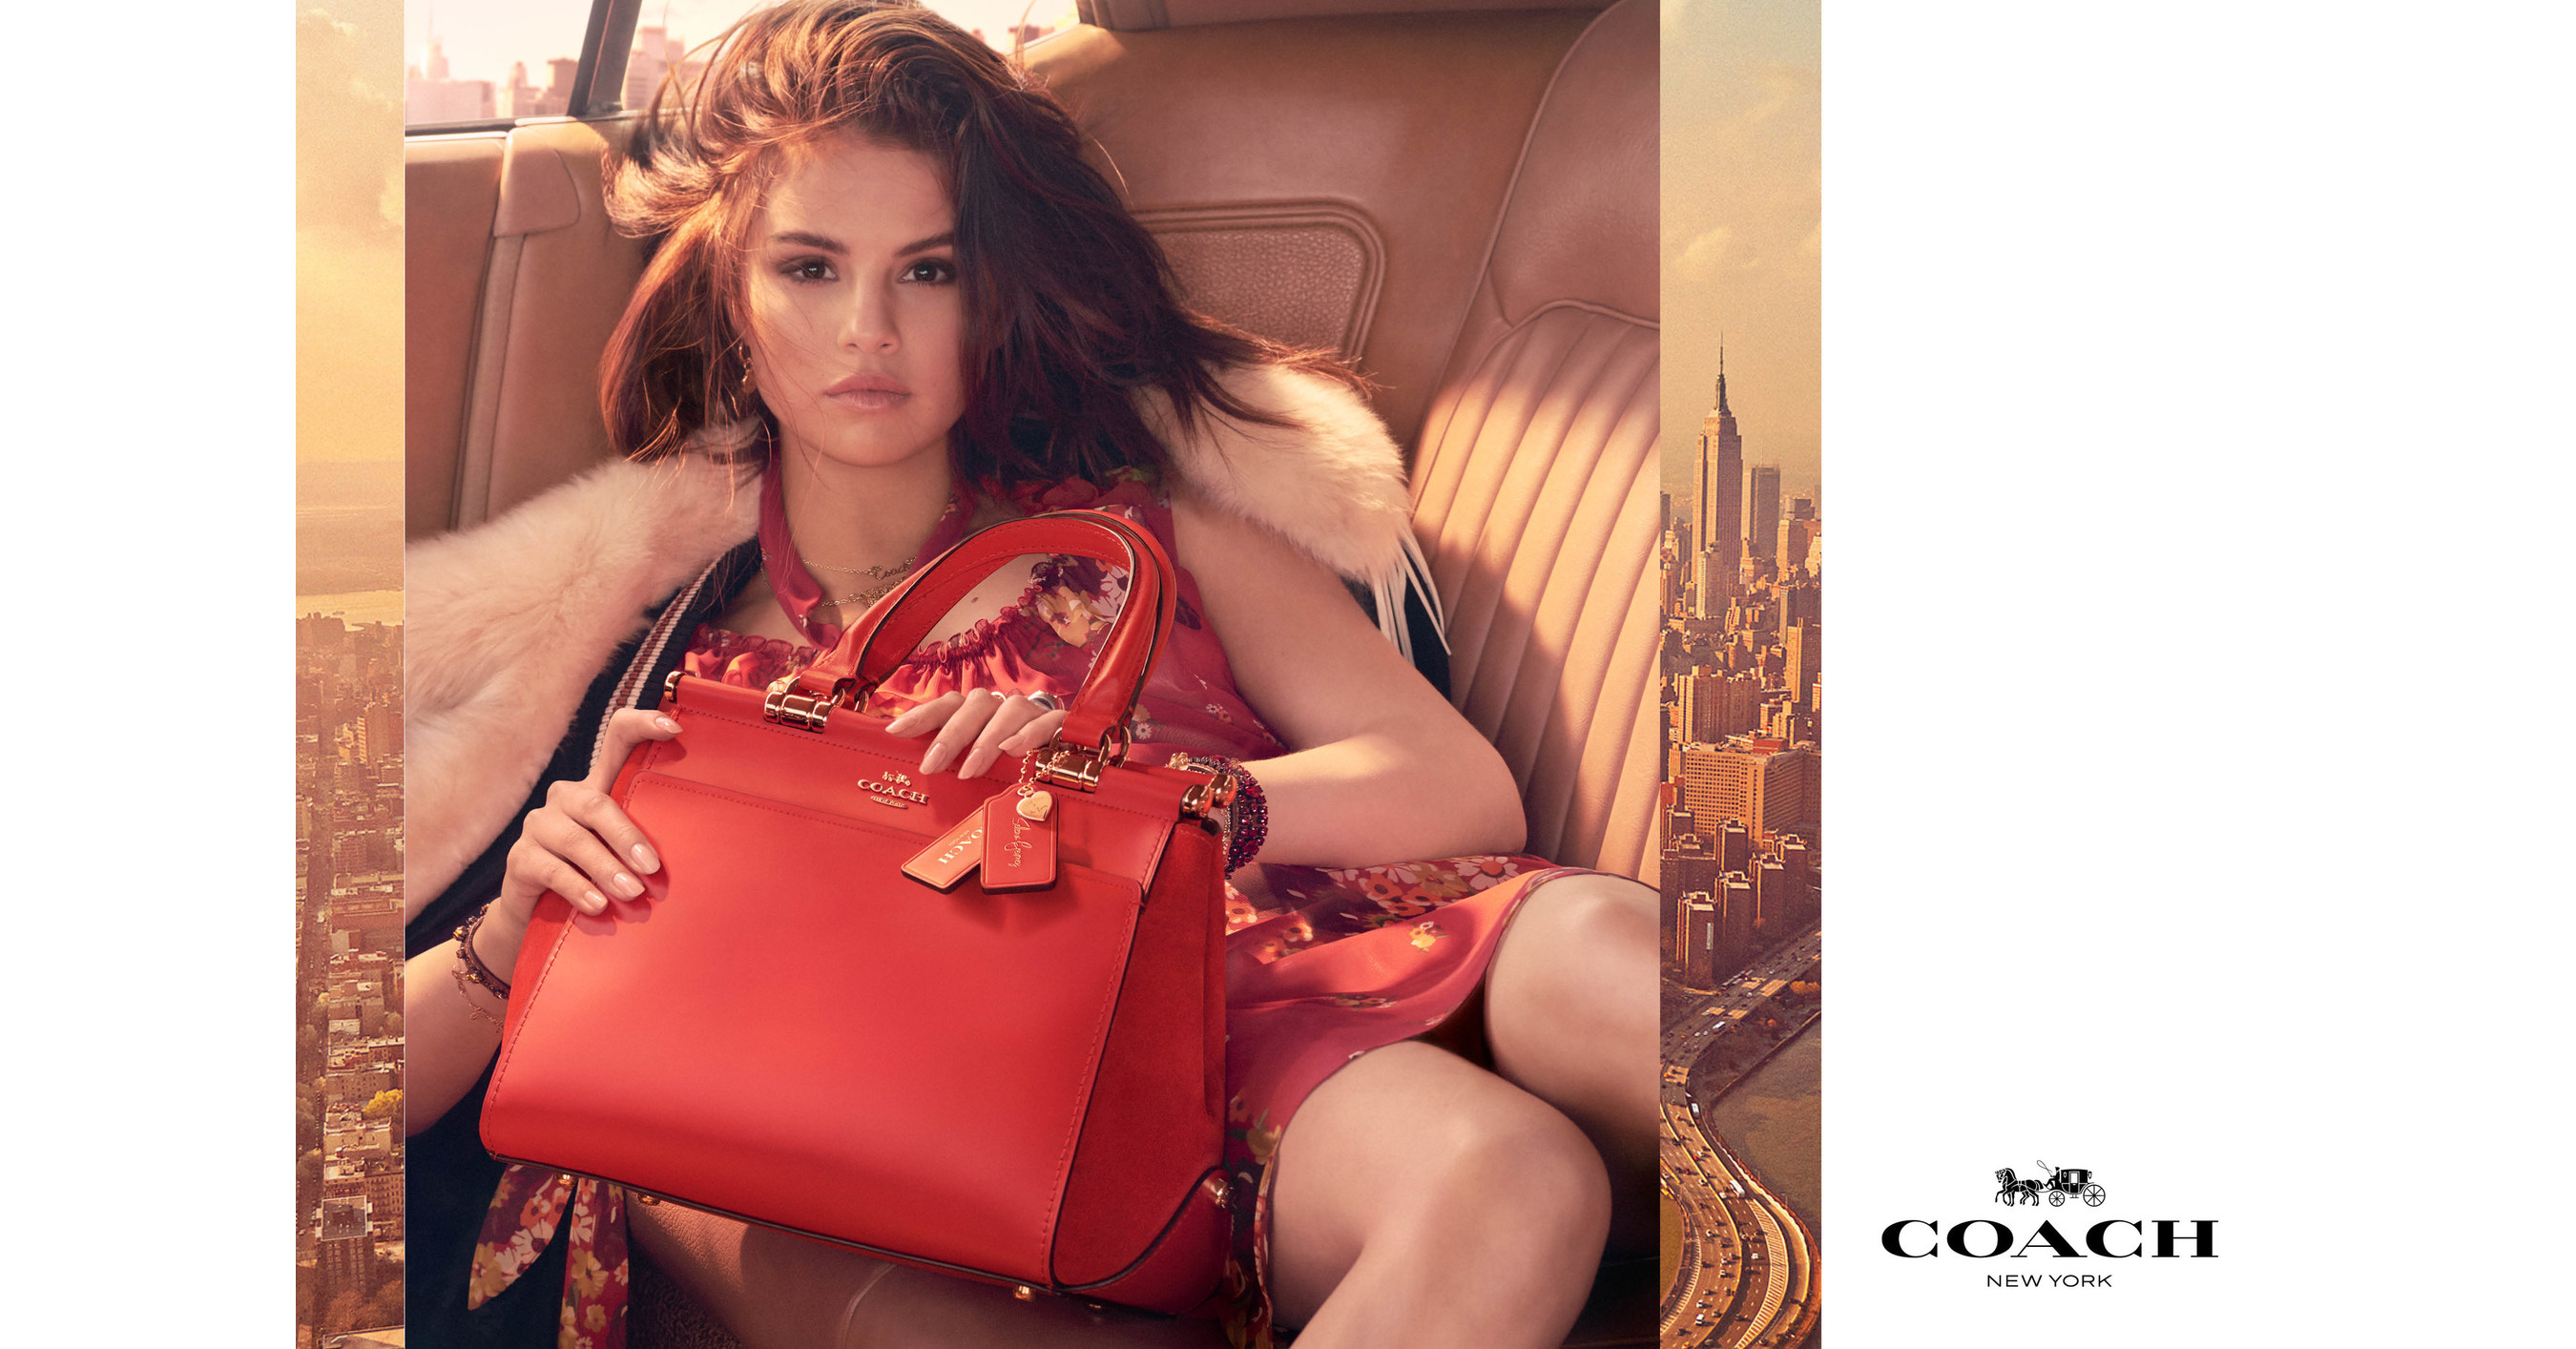 Selena Gomez's Coach Collection Is Here, and Comes With Some